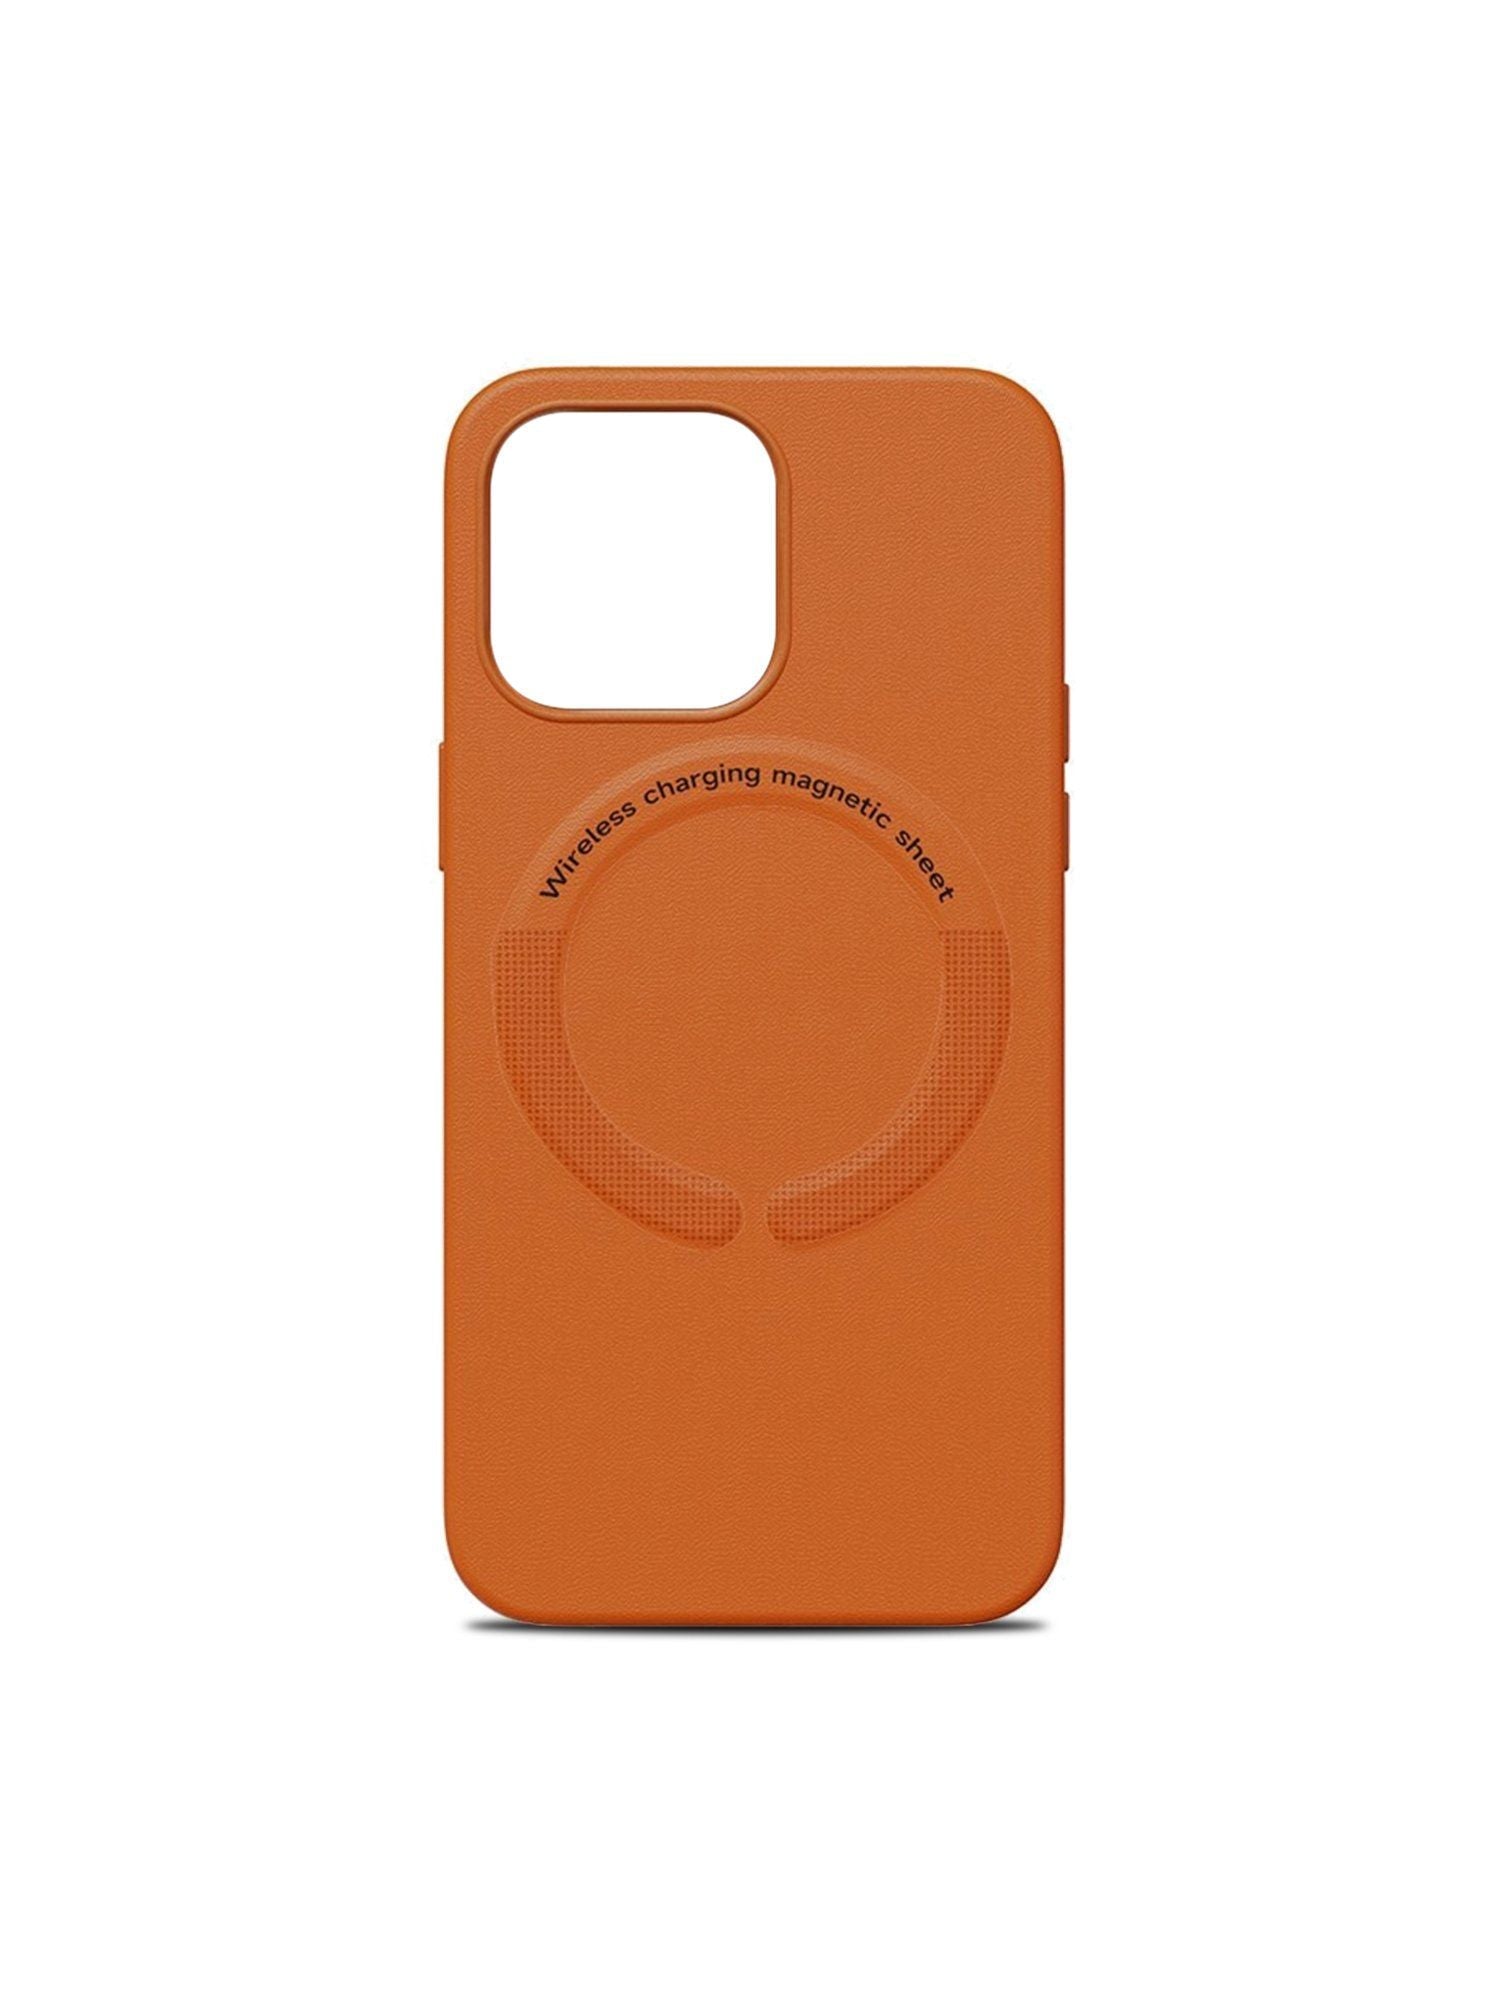 iPhone 12 Pro Leather Cover with Mag-Safe, Premium Apple iPhone 12 Pro Leather Case with Mag-Safe Orange